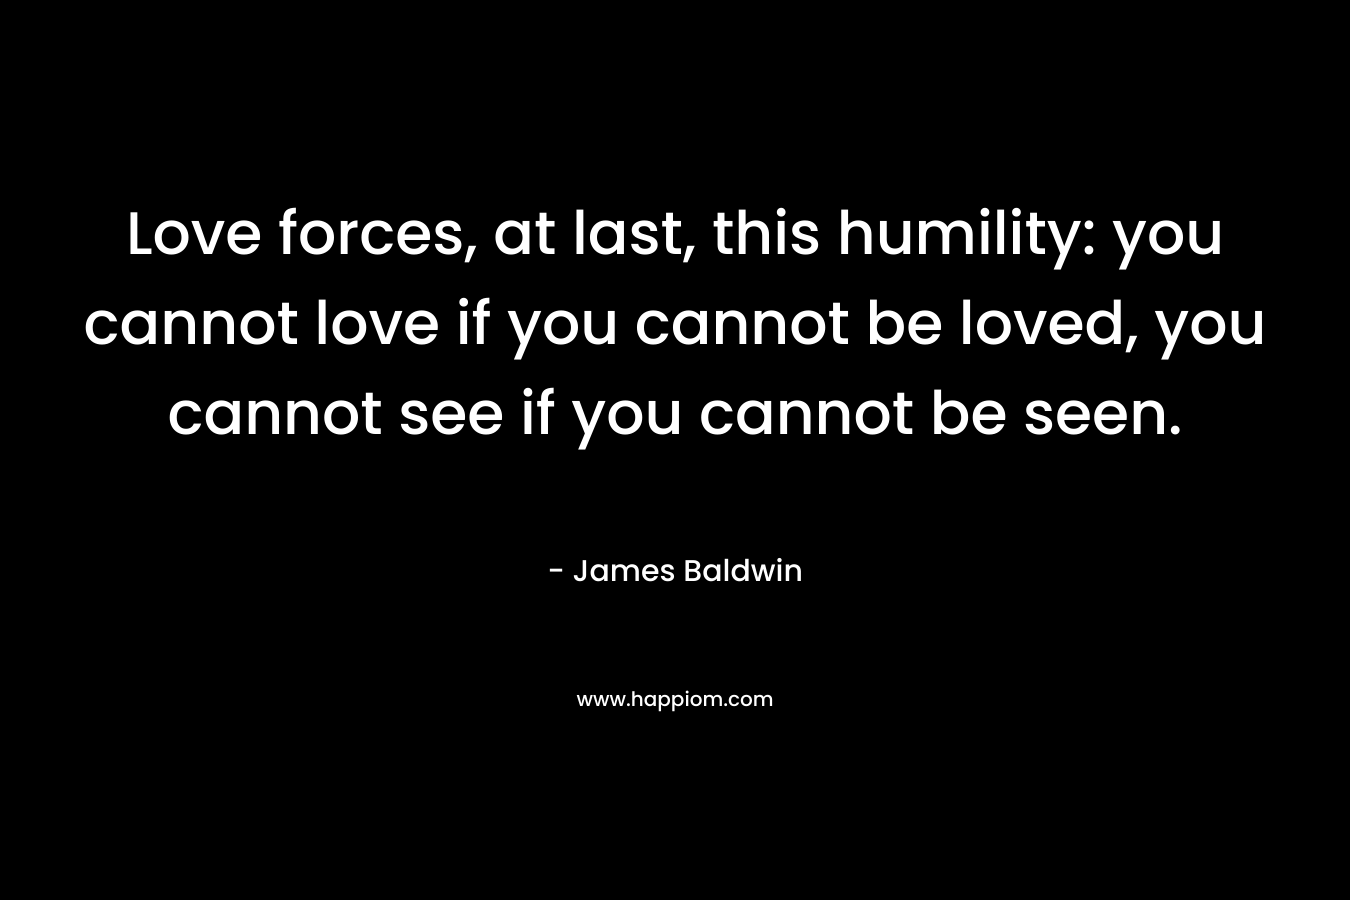 Love forces, at last, this humility: you cannot love if you cannot be loved, you cannot see if you cannot be seen.